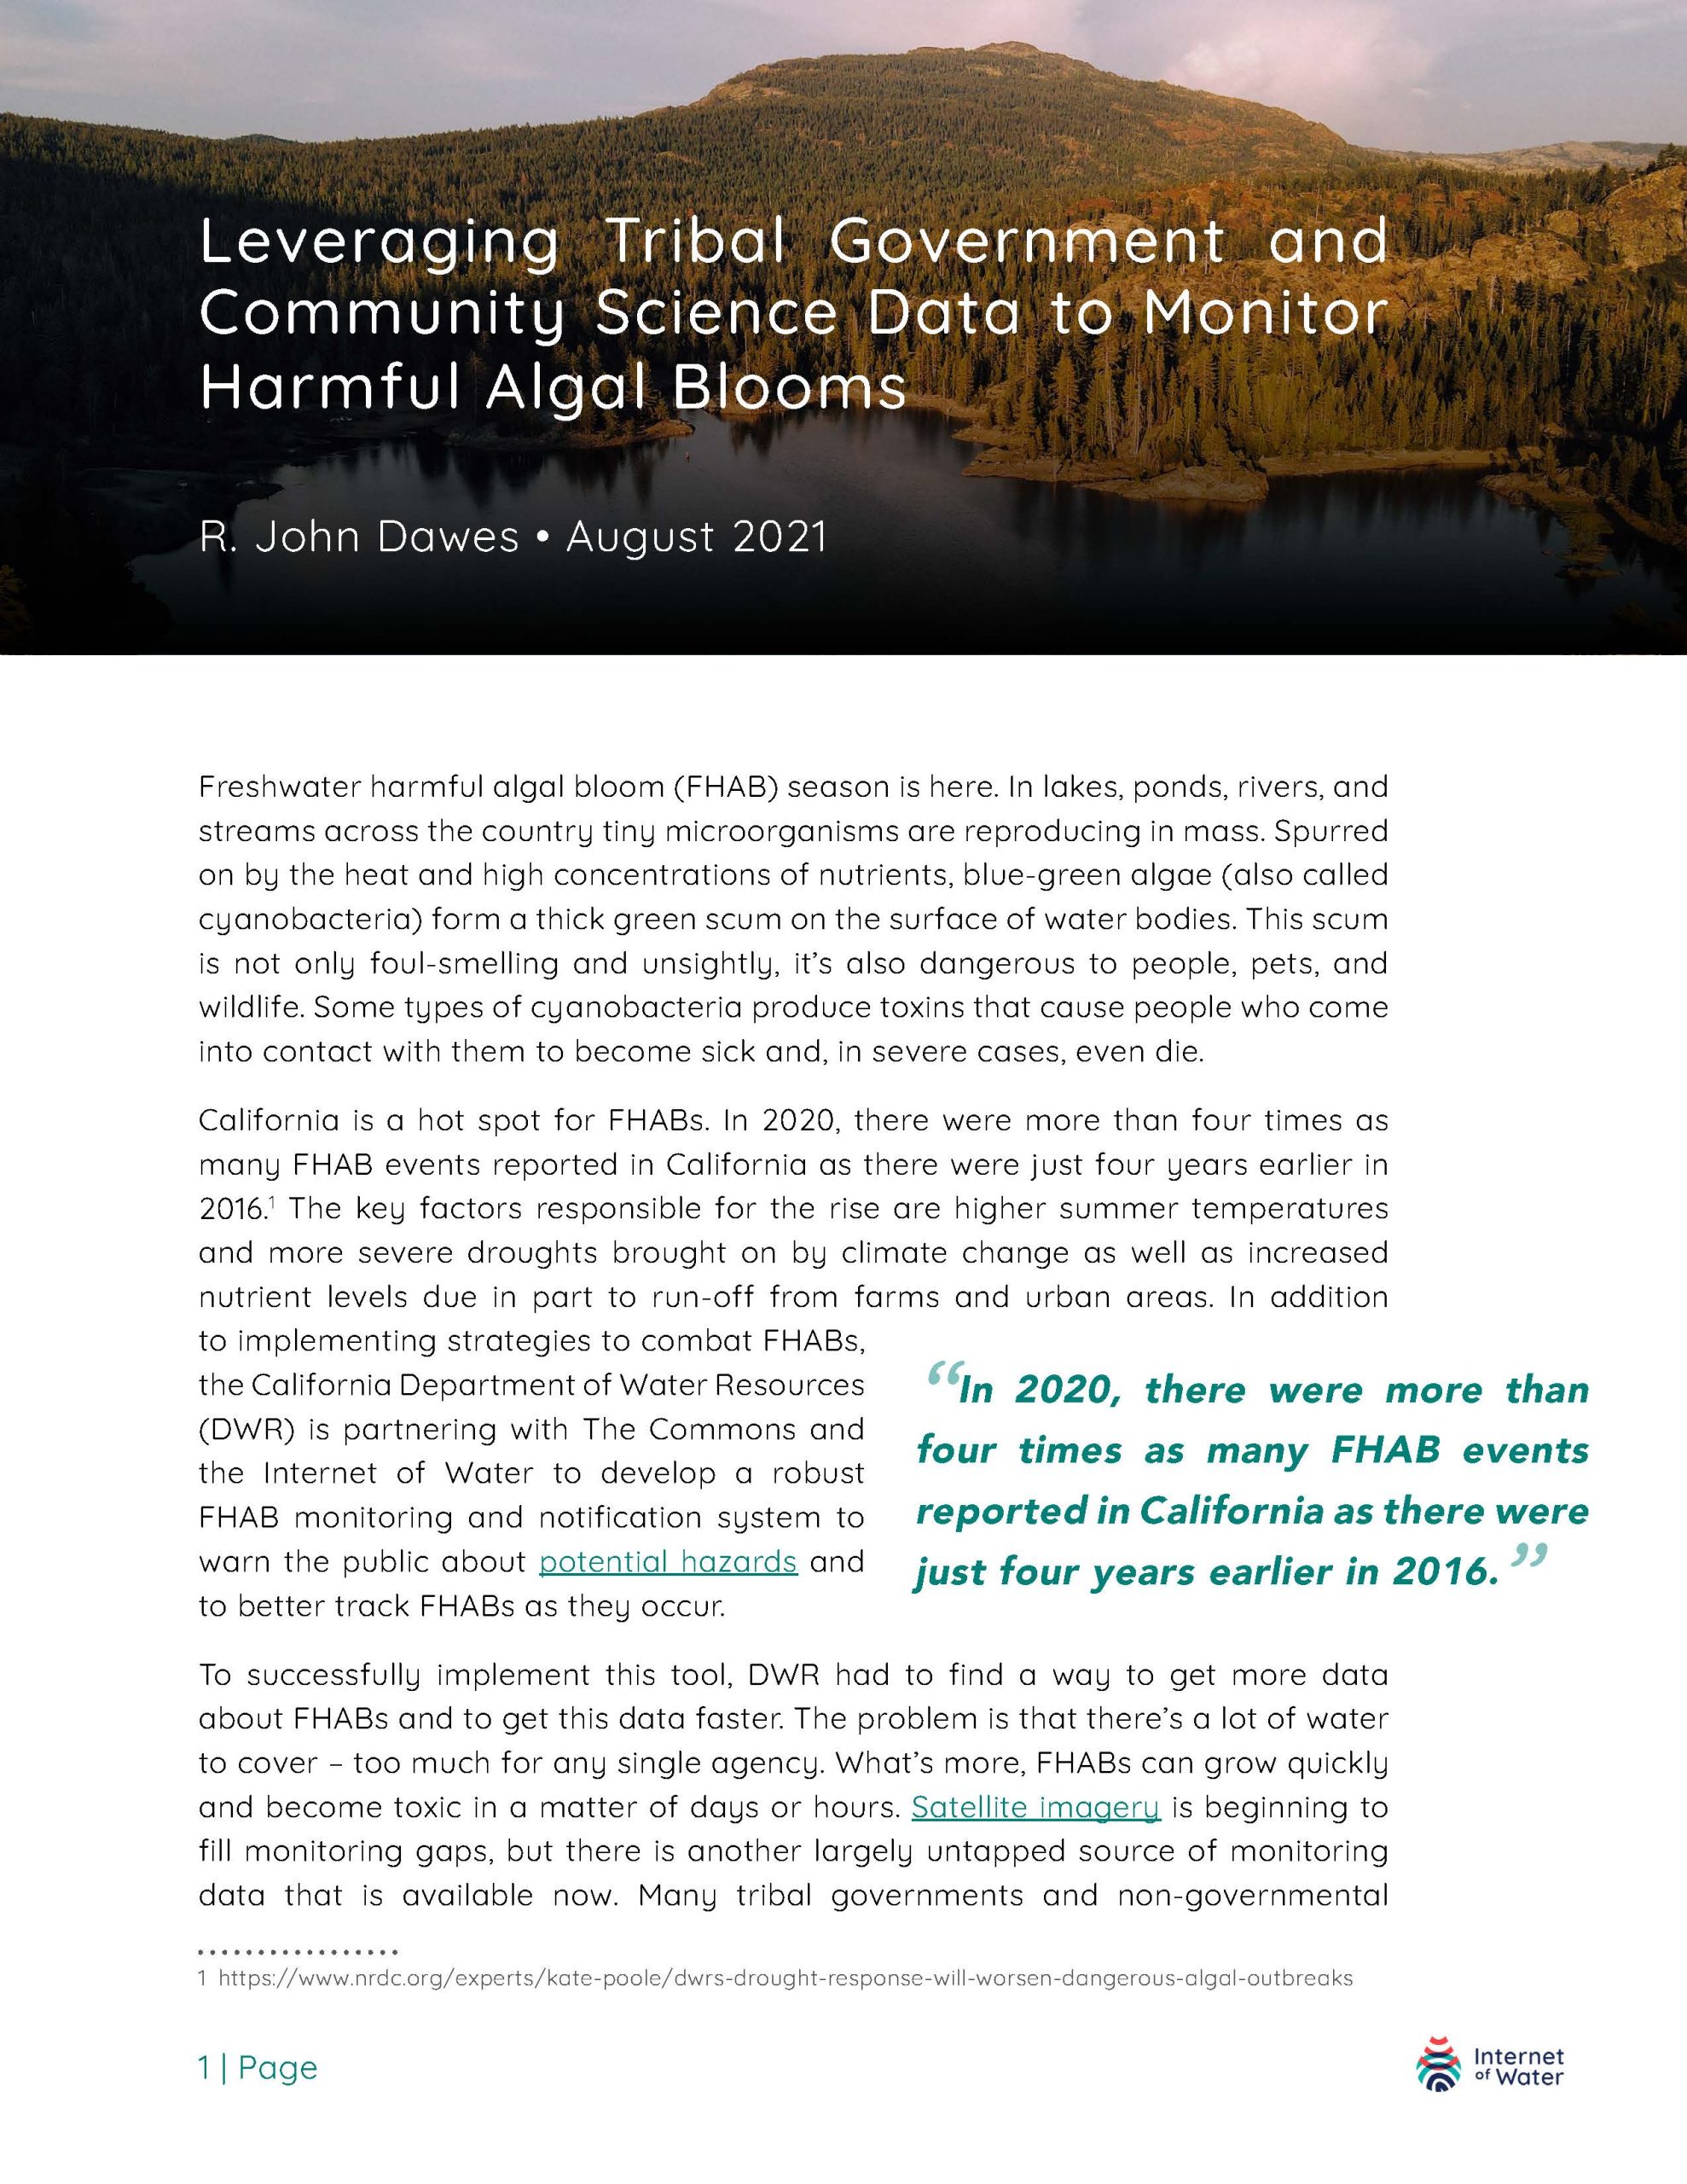 Leveraging Tribal Government and Community Science Data to Monitor Harmful Algal Blooms